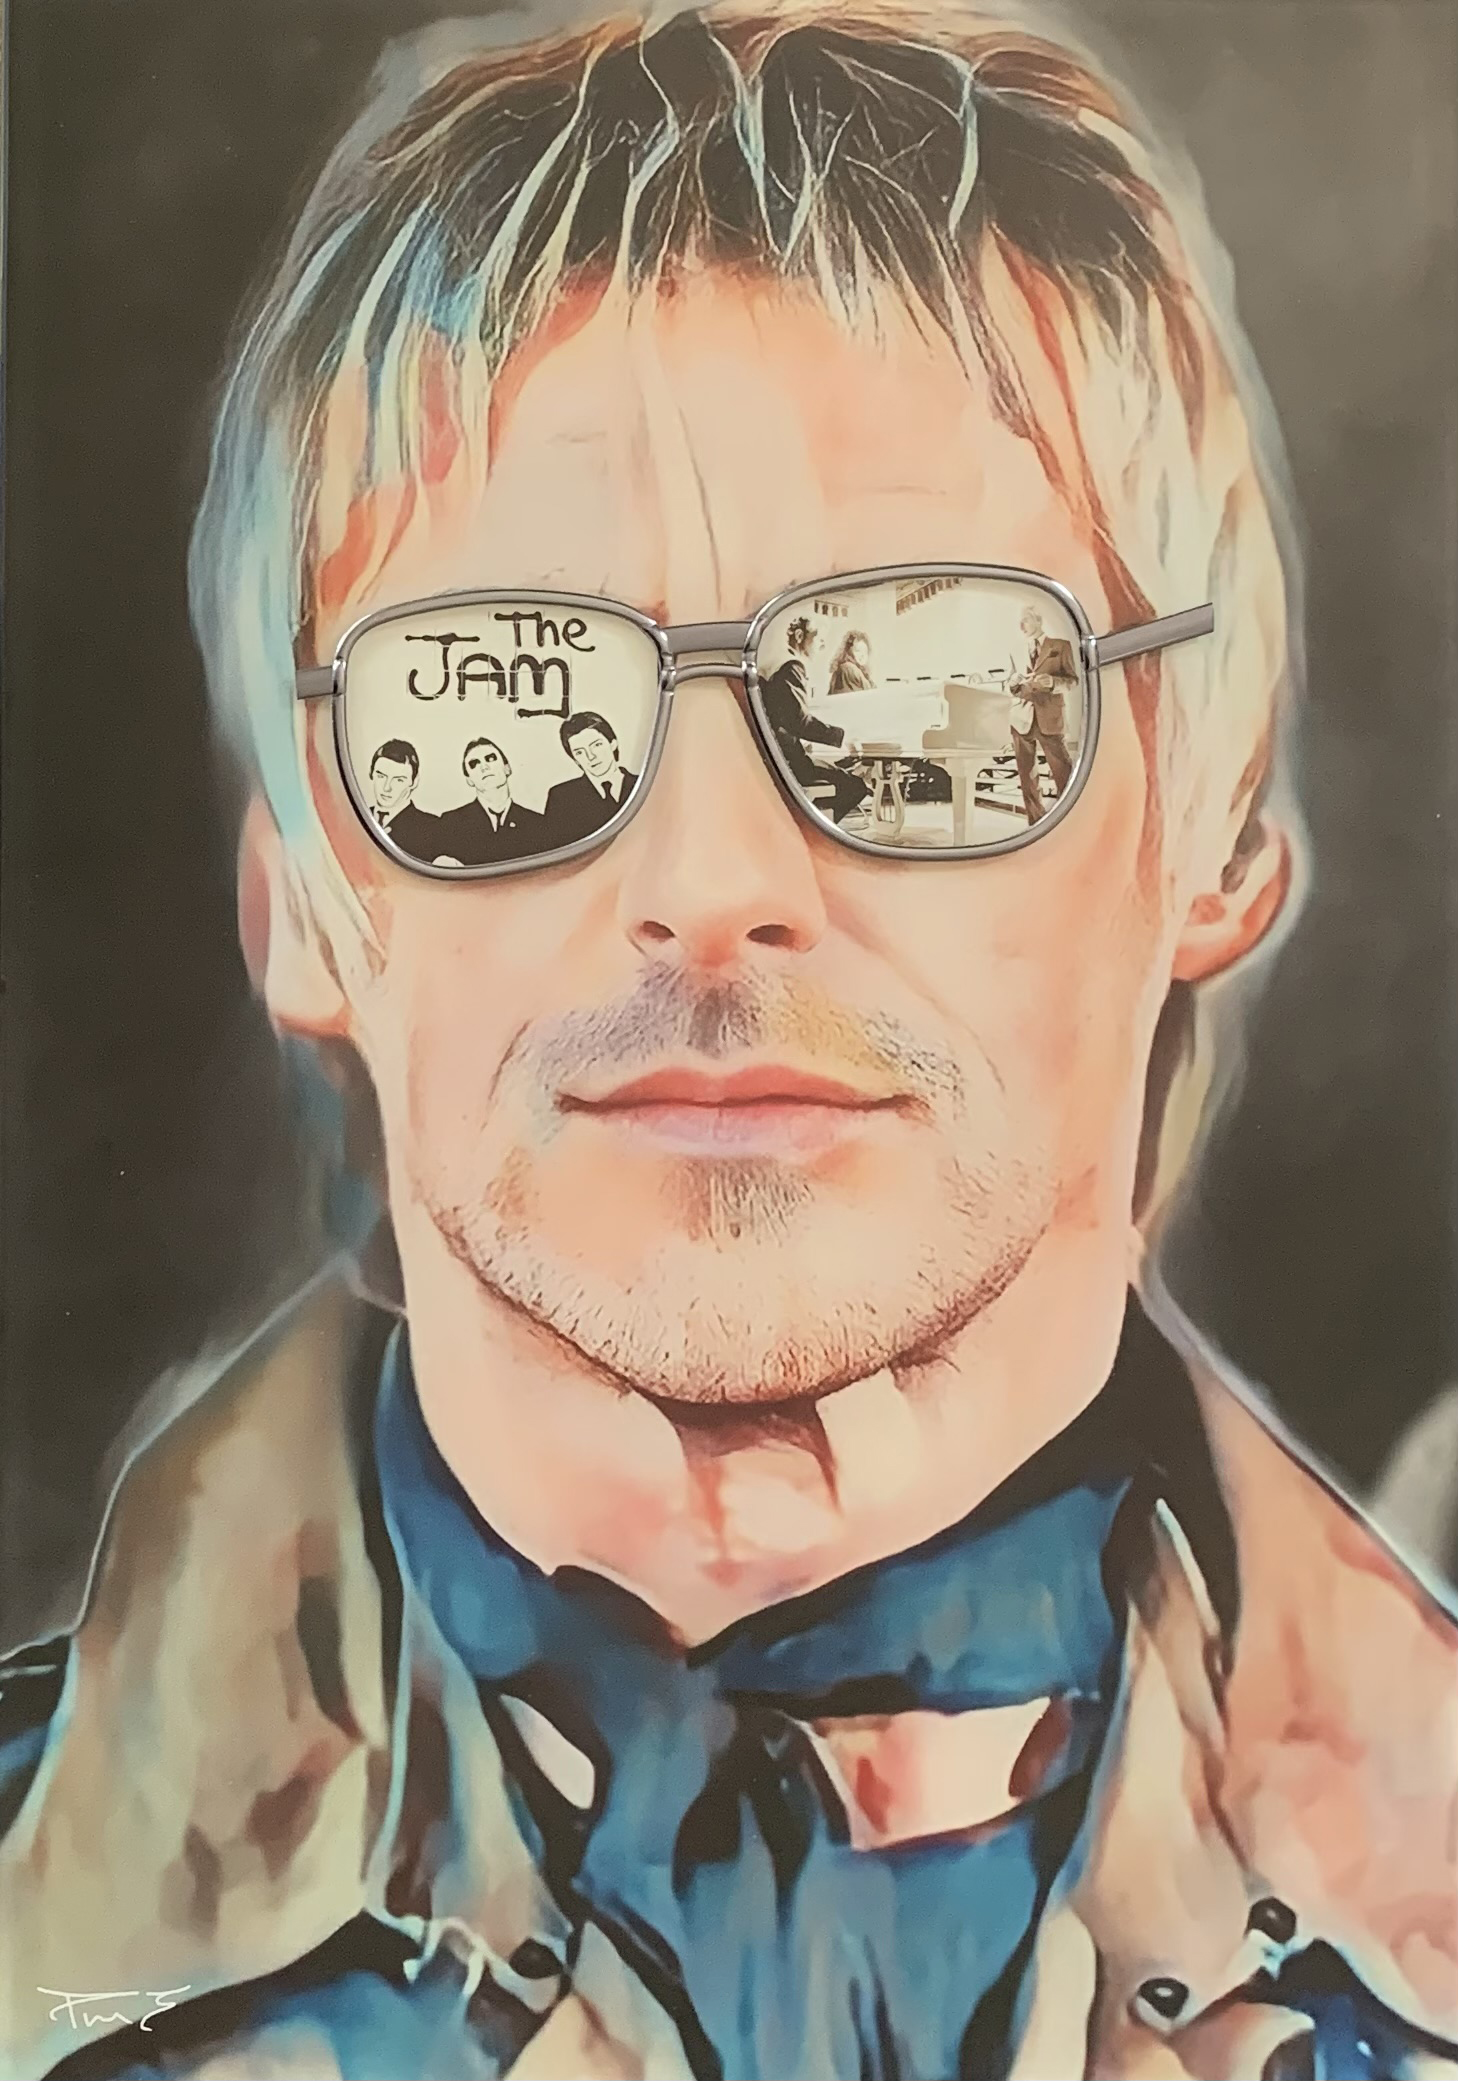 Paul Weller A3 by Paul Marshall Johnson, Print on Toughened Glass with Original lead work